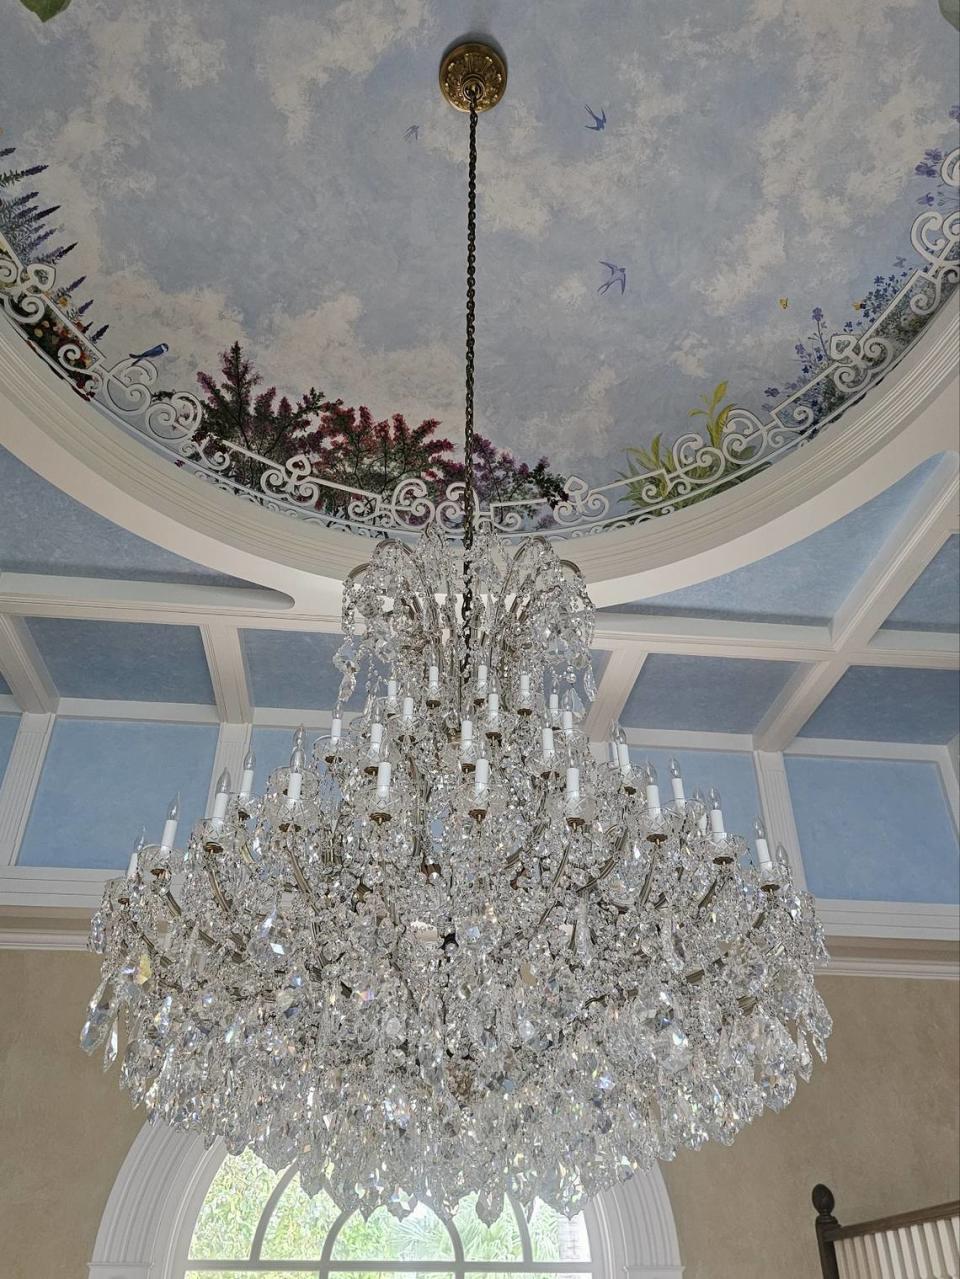 Chandeliers are for sale at the La Maison Blanche auction in Fort Lauderdale.